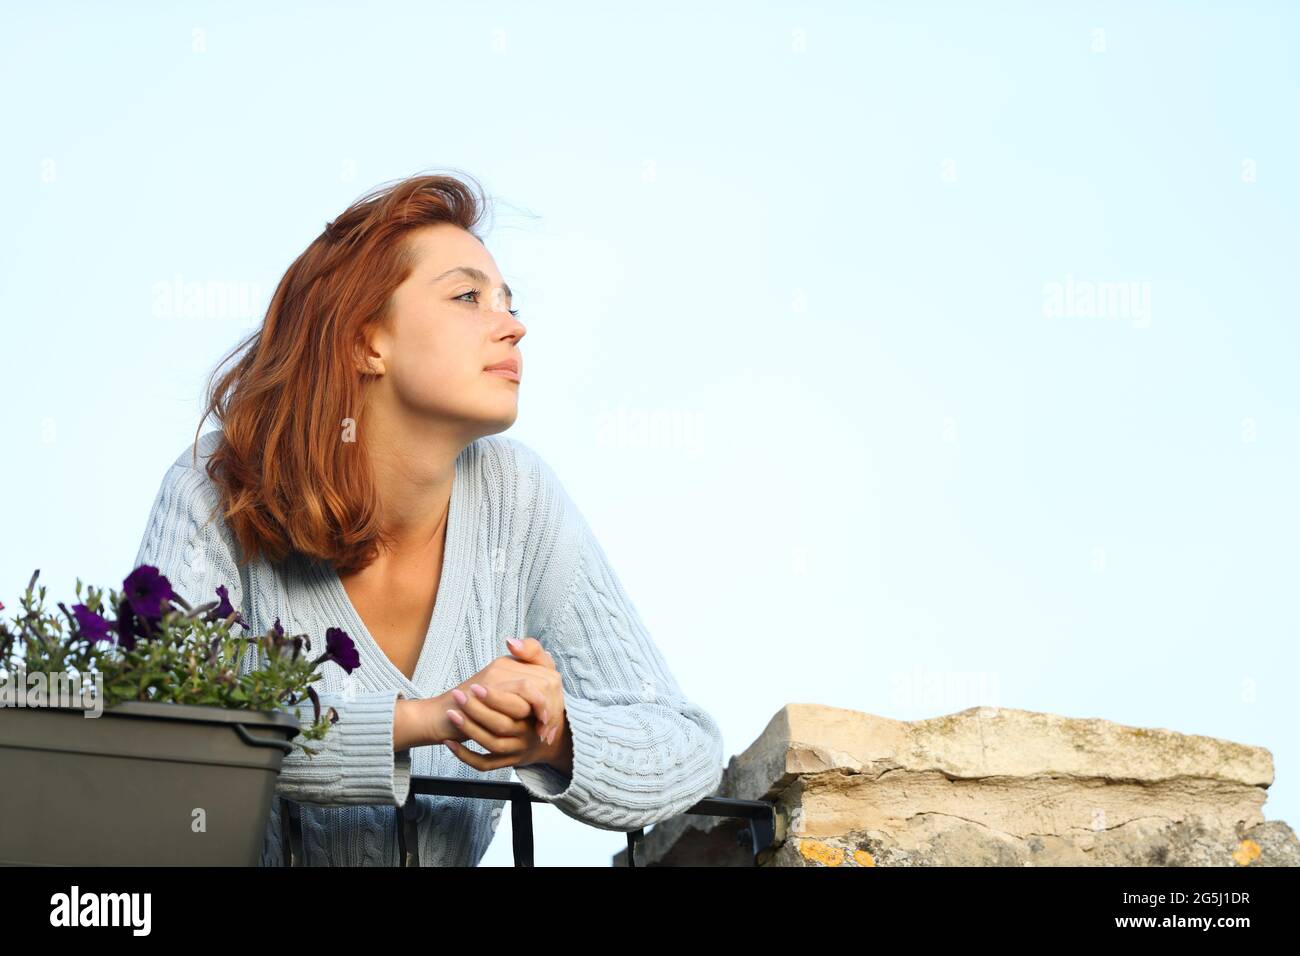 Relaxed woman looking away from a balcony at home Stock Photo